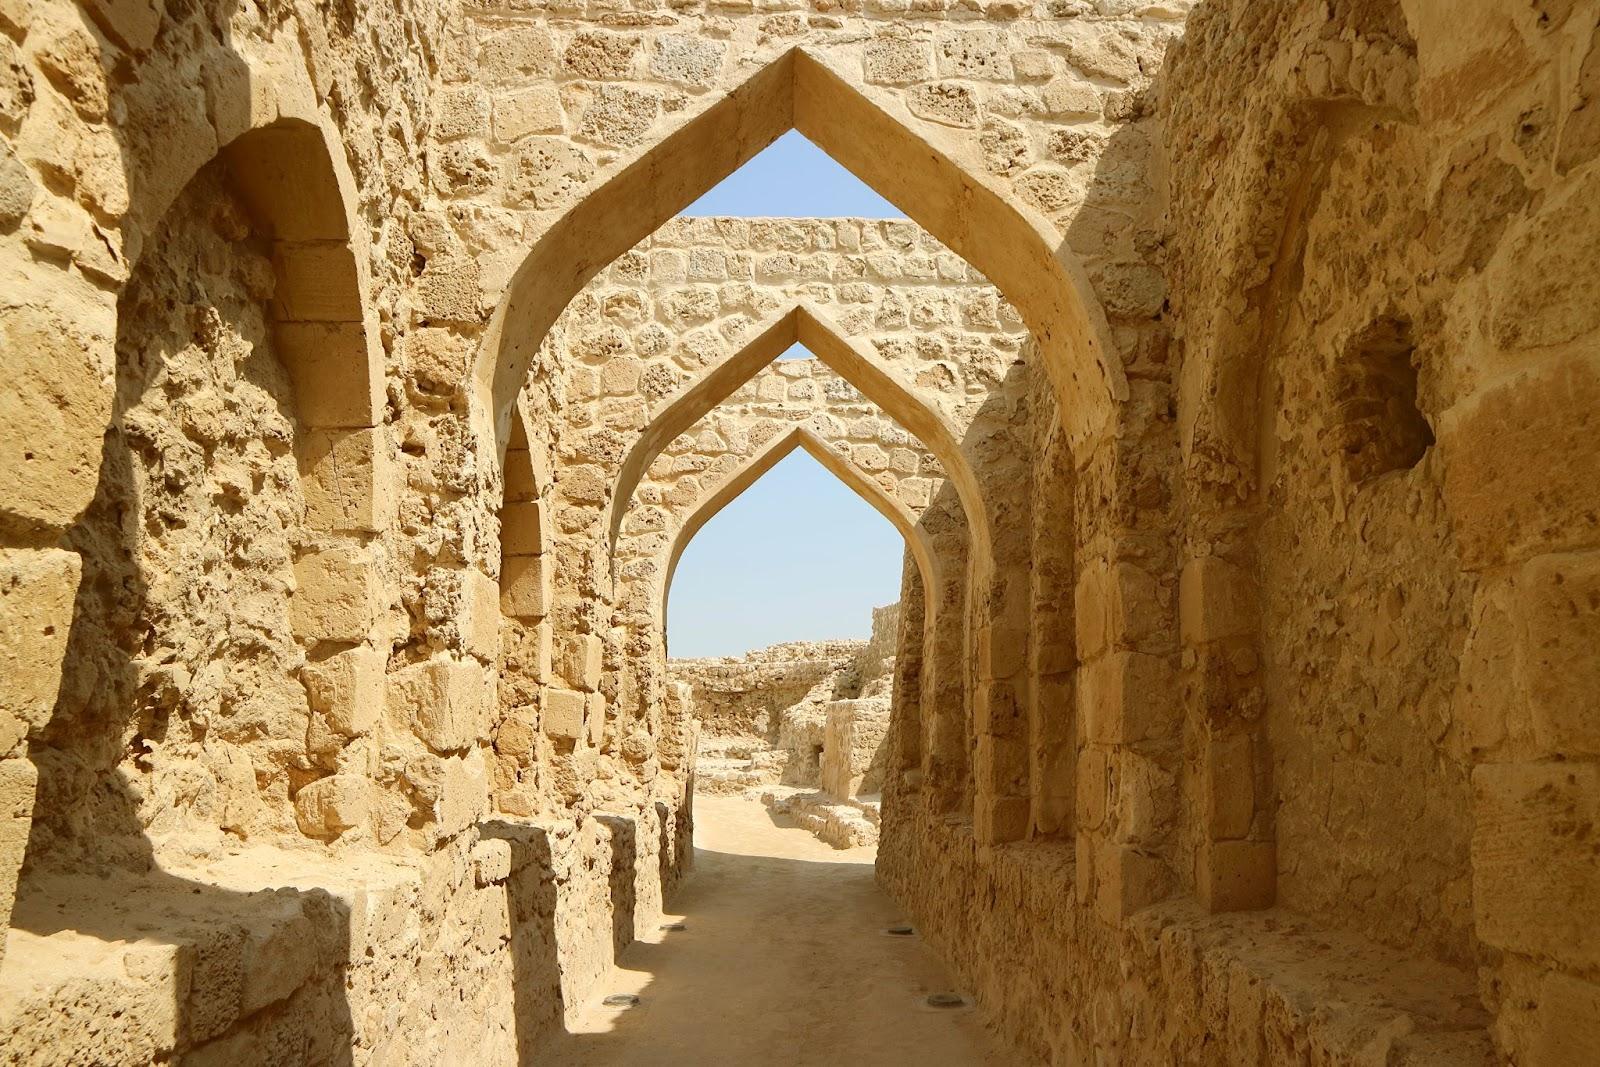 The Symbolic Archways of Bahrain Fort or Qal'at al-Bahrain, Archaeological Site in Manama, Bahrain